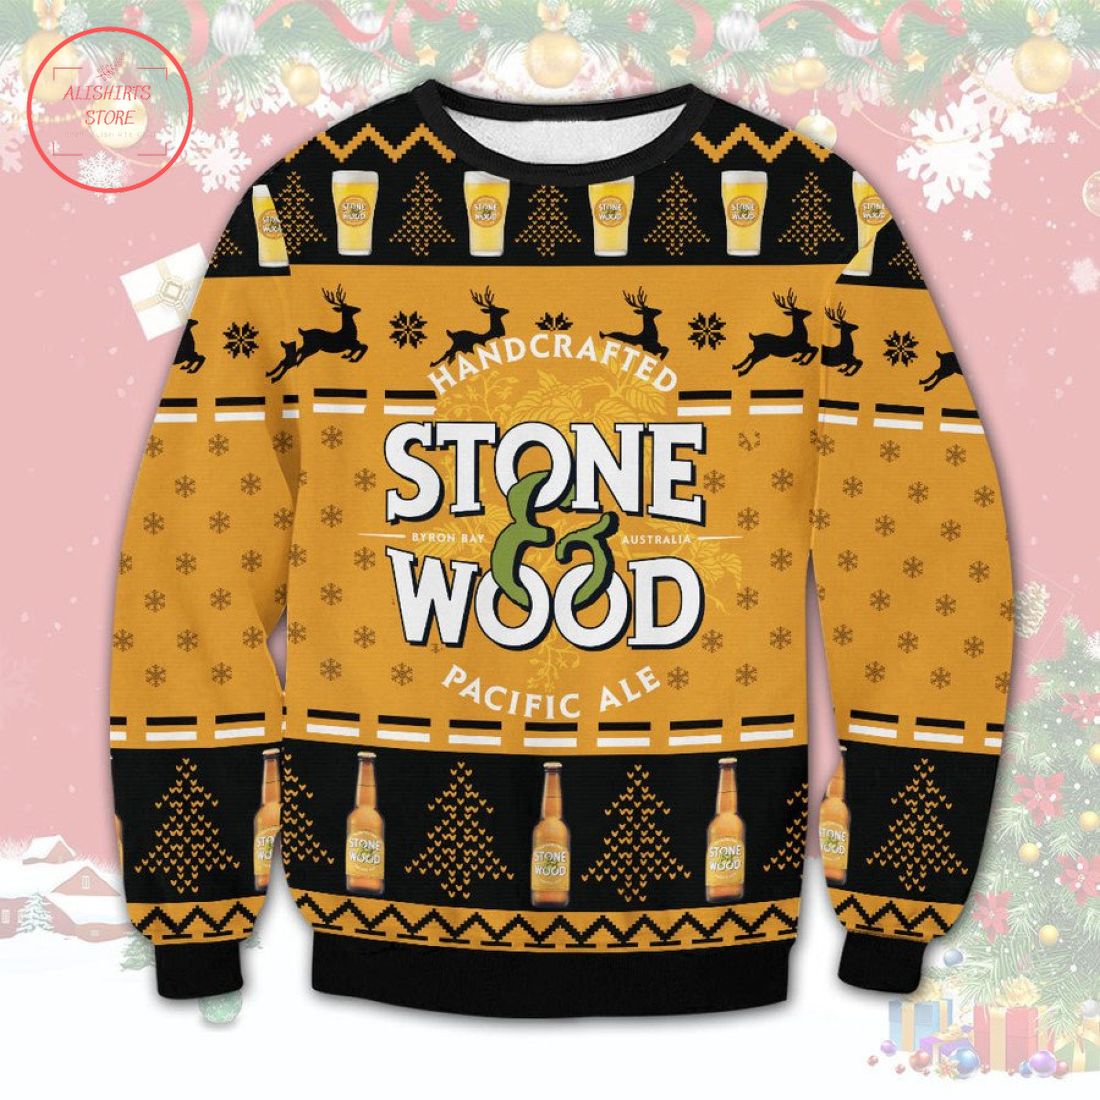 Stone Wood Pacific Ale Ugly Christmas Sweater